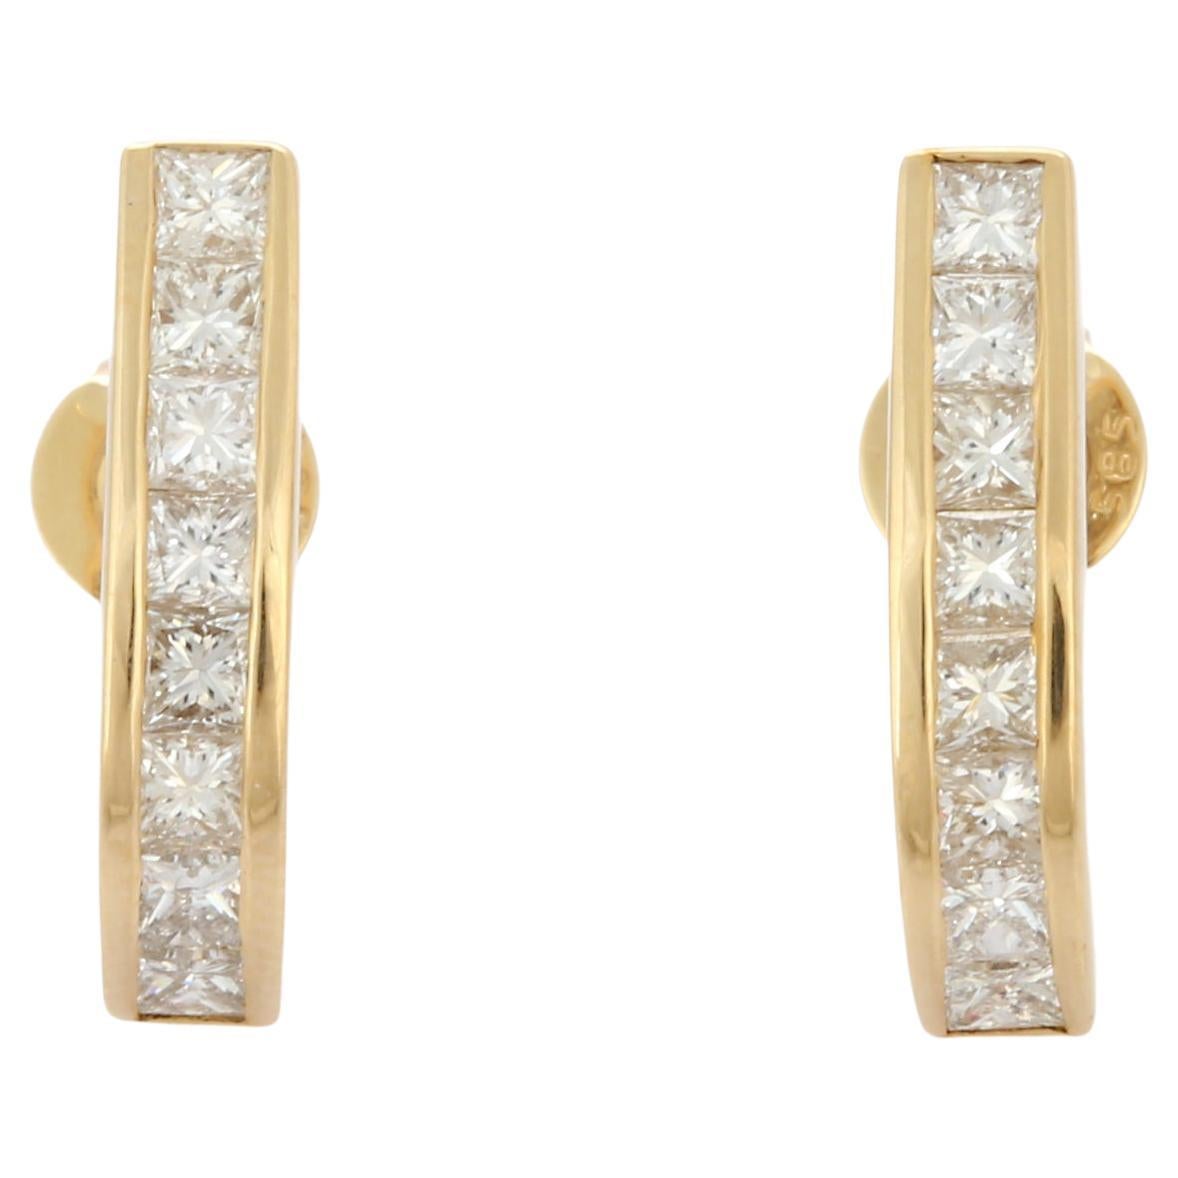 Diamond Earrings 14/18Kt Rose/White/Yellow Gold Jewelry 0.157 Ct, IJ-SI Sparkle Jewels Warped Square Stunner Diamond Ear Rings